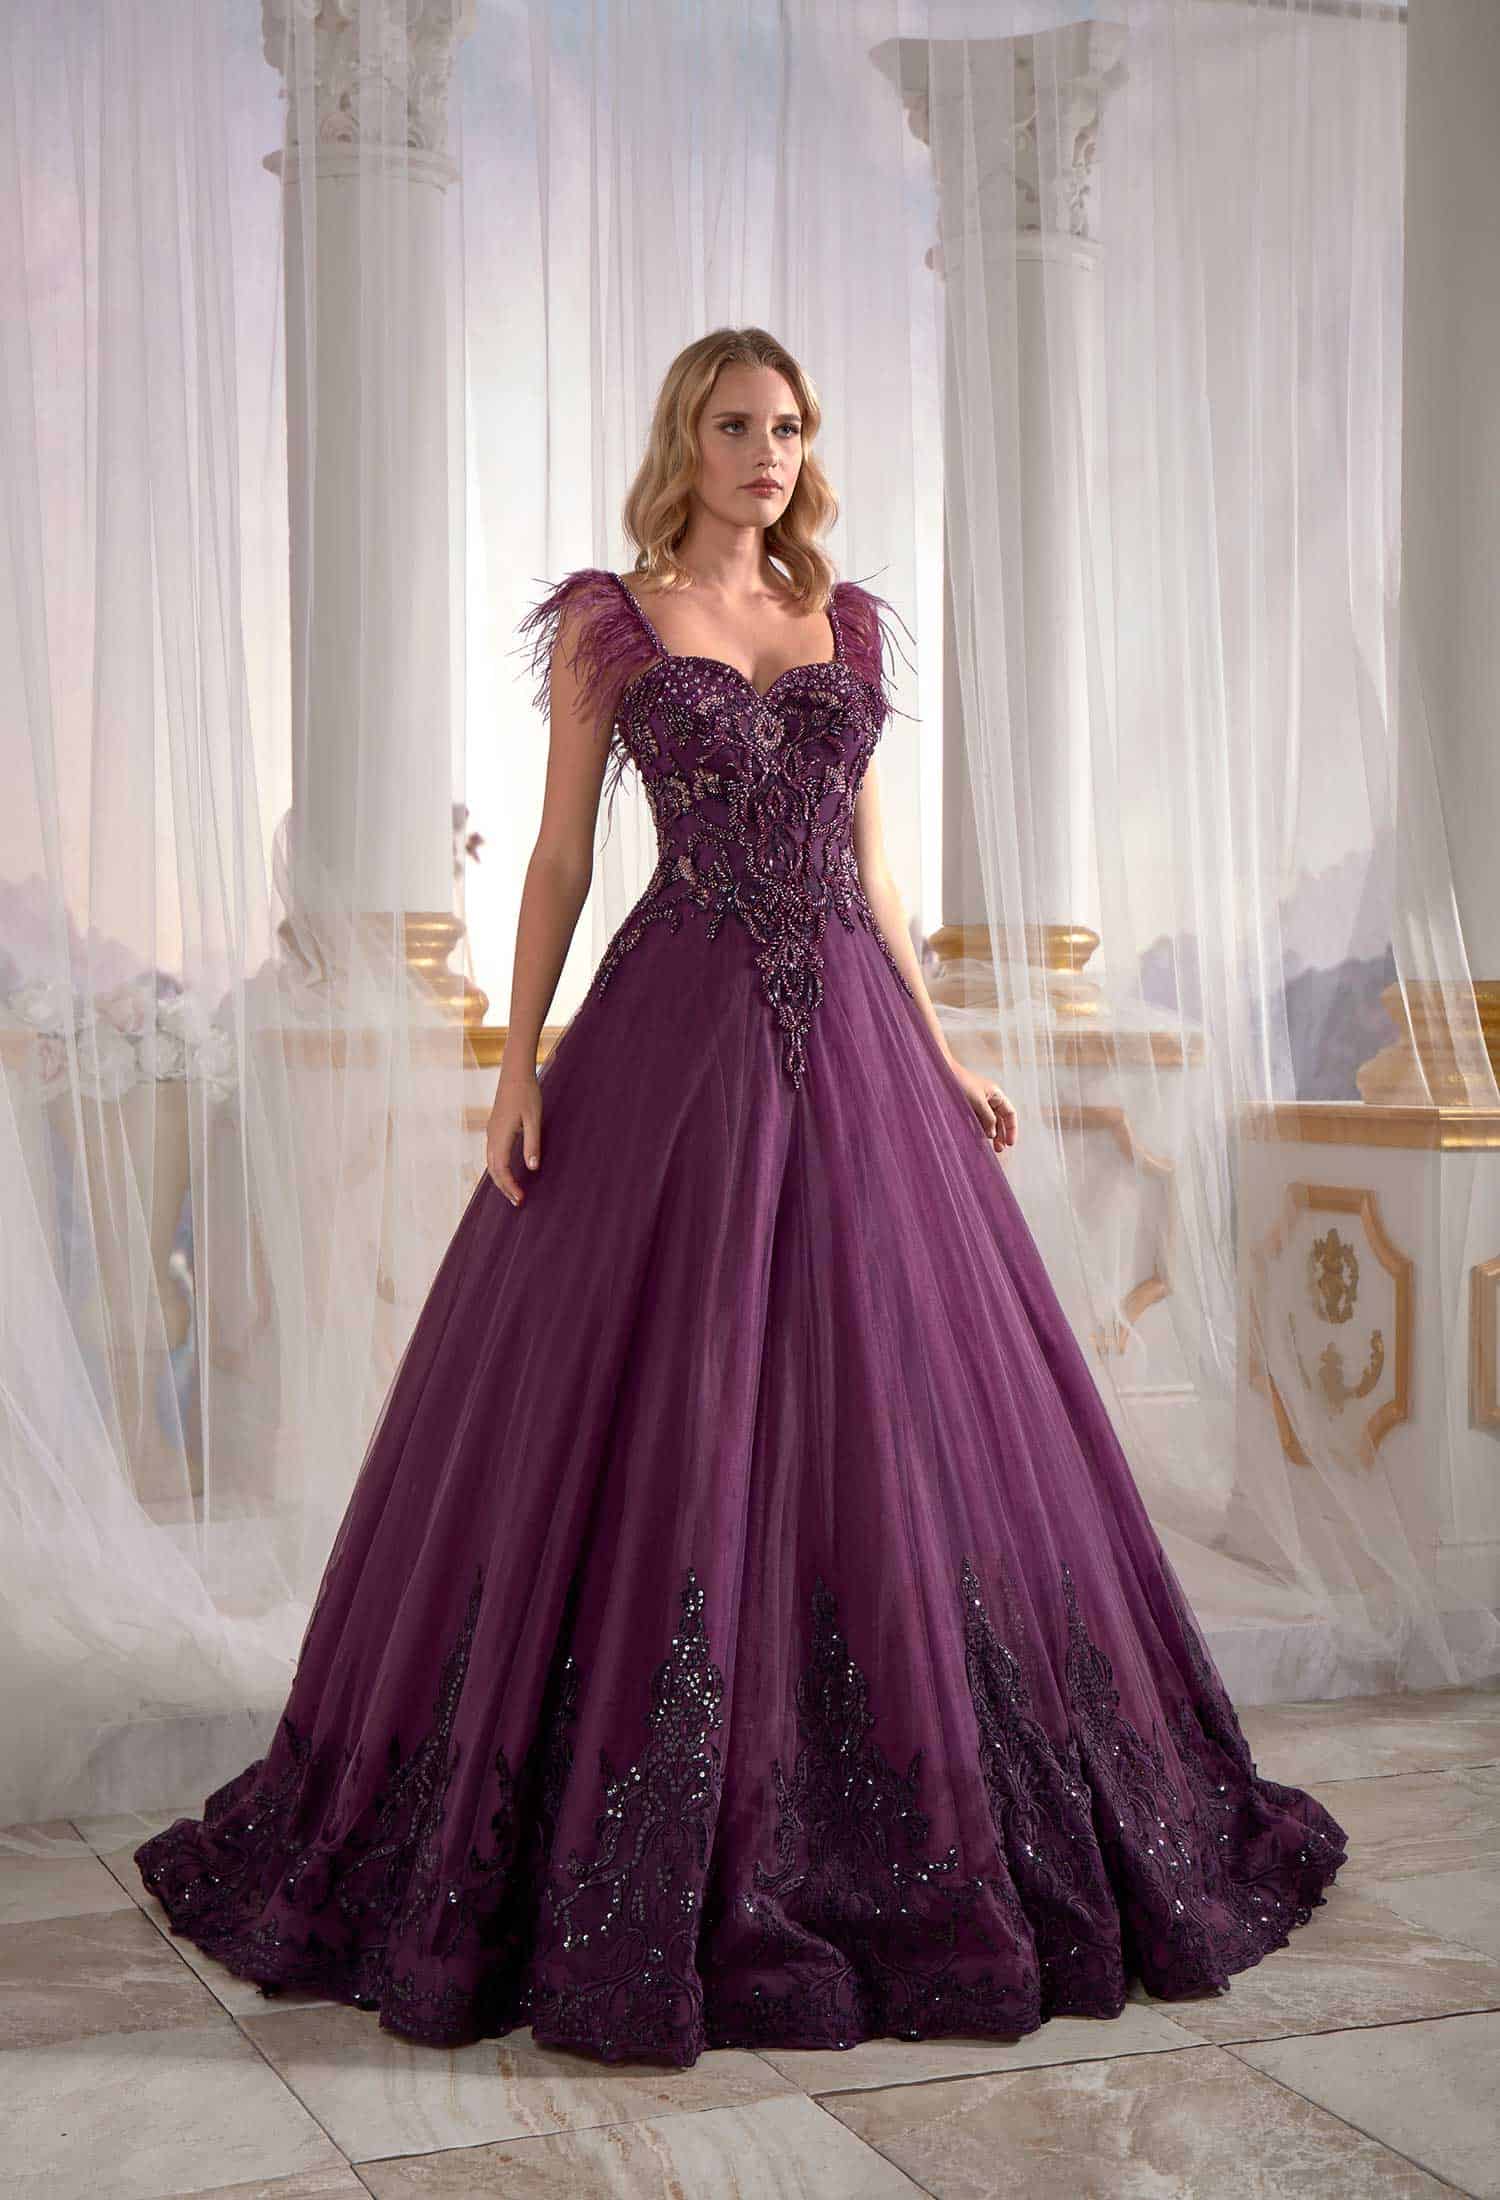 long gown dress online shopping Purple Tulle On Velvet Ball Gown Needle & Thread Embroidered Exclusive Dress (1)